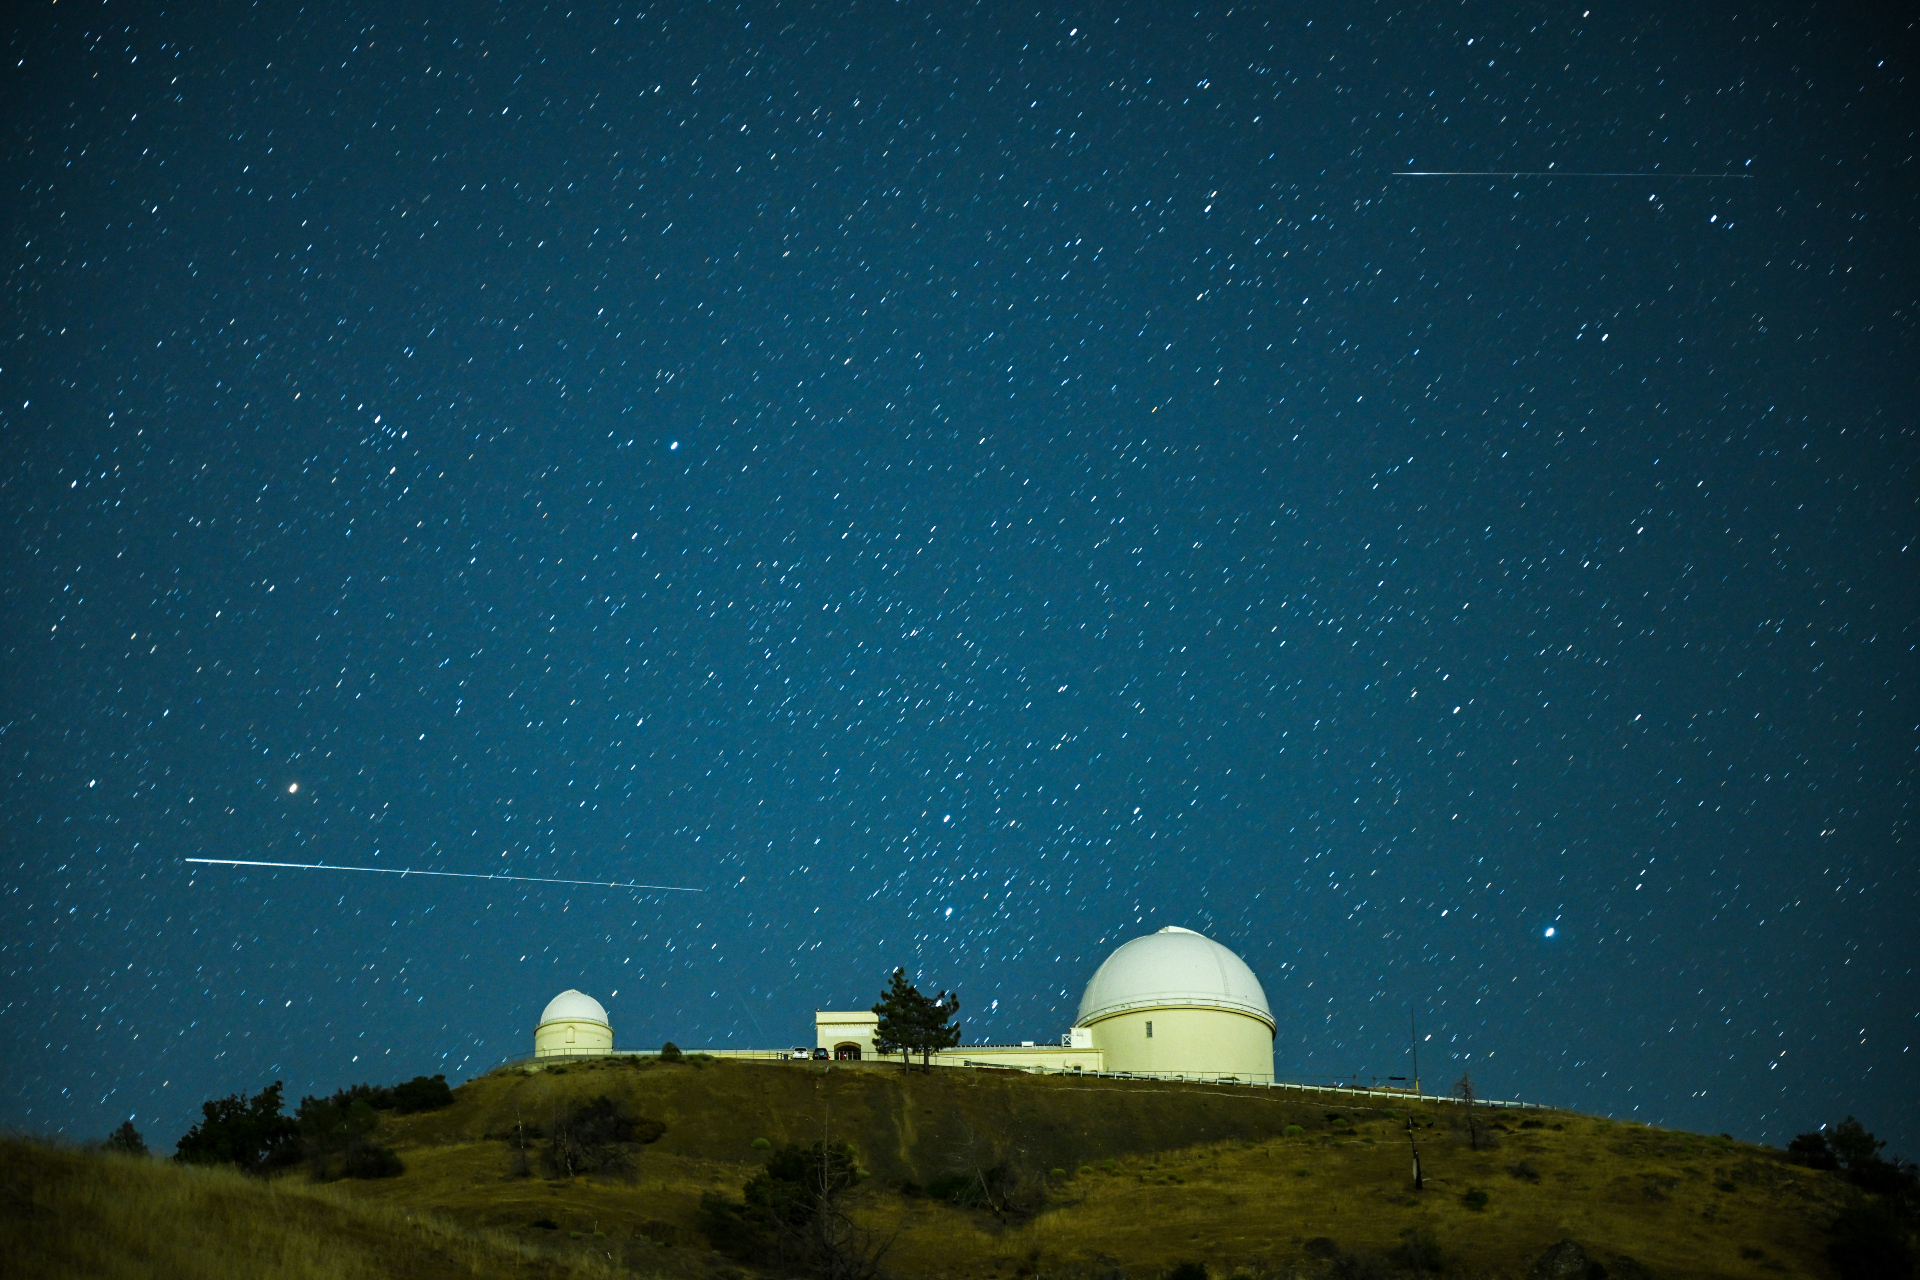 A long white train from the Perseid meteorite passes Lick Observatory's dome structure in a horizontal orientation against the starry sky.